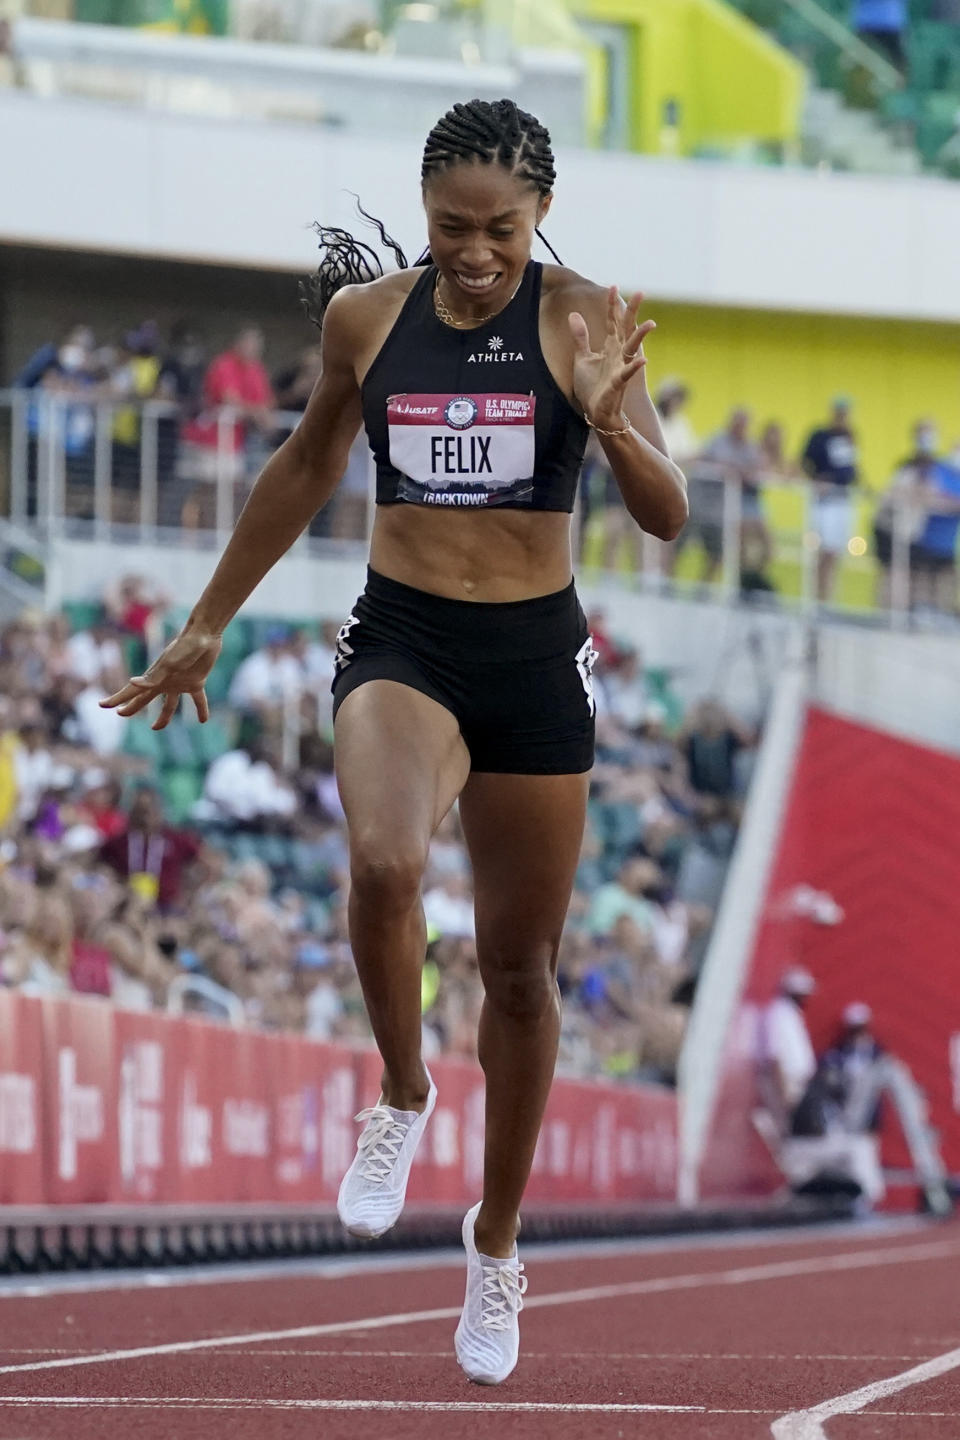 Allyson Felix finishes in second place in the women's 400-meter run at the U.S. Olympic Track and Field Trials Sunday, June 20, 2021, in Eugene, Ore. (AP Photo/Ashley Landis)